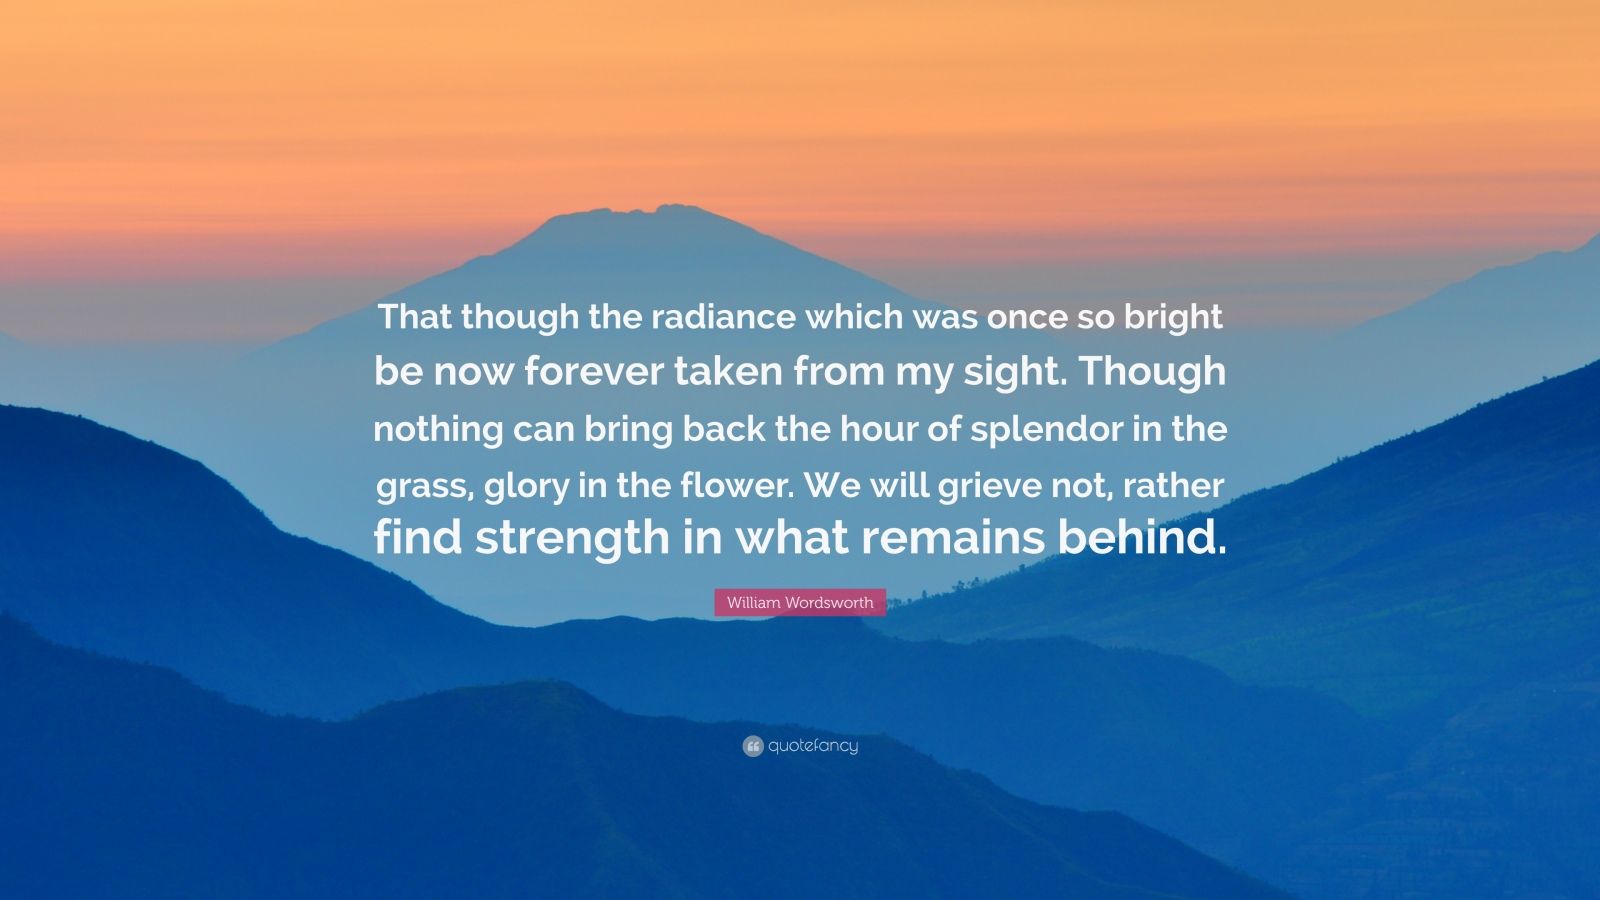 William Wordsworth Quote: “That though the radiance which was once so ...